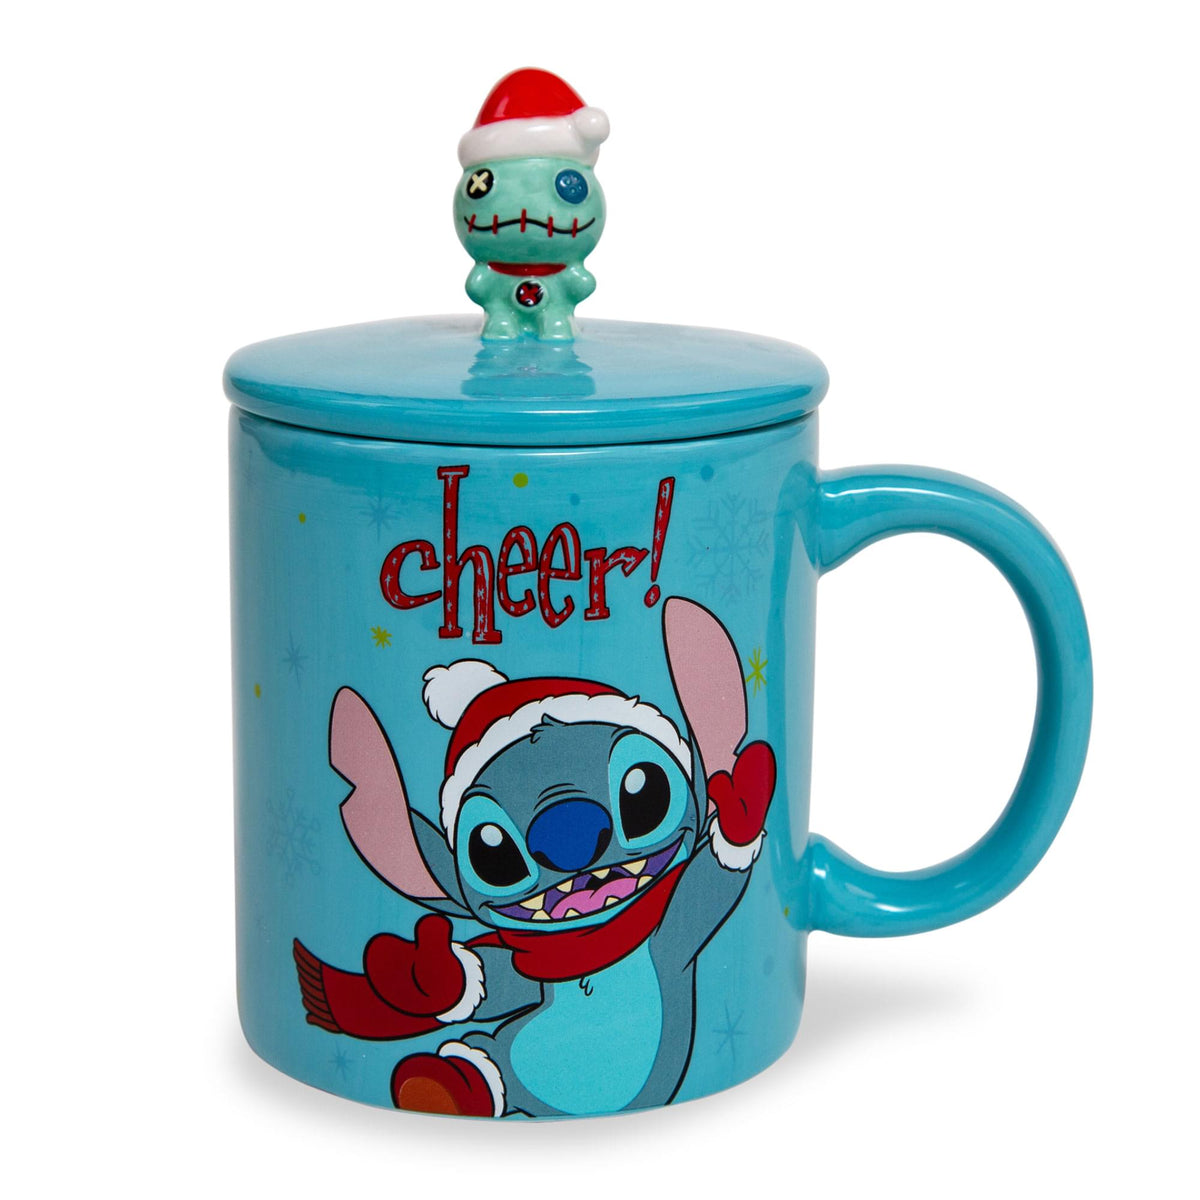 Disney Pixar Up Adventure Is Out There Ceramic Camper Mug | Holds 20 Ounces